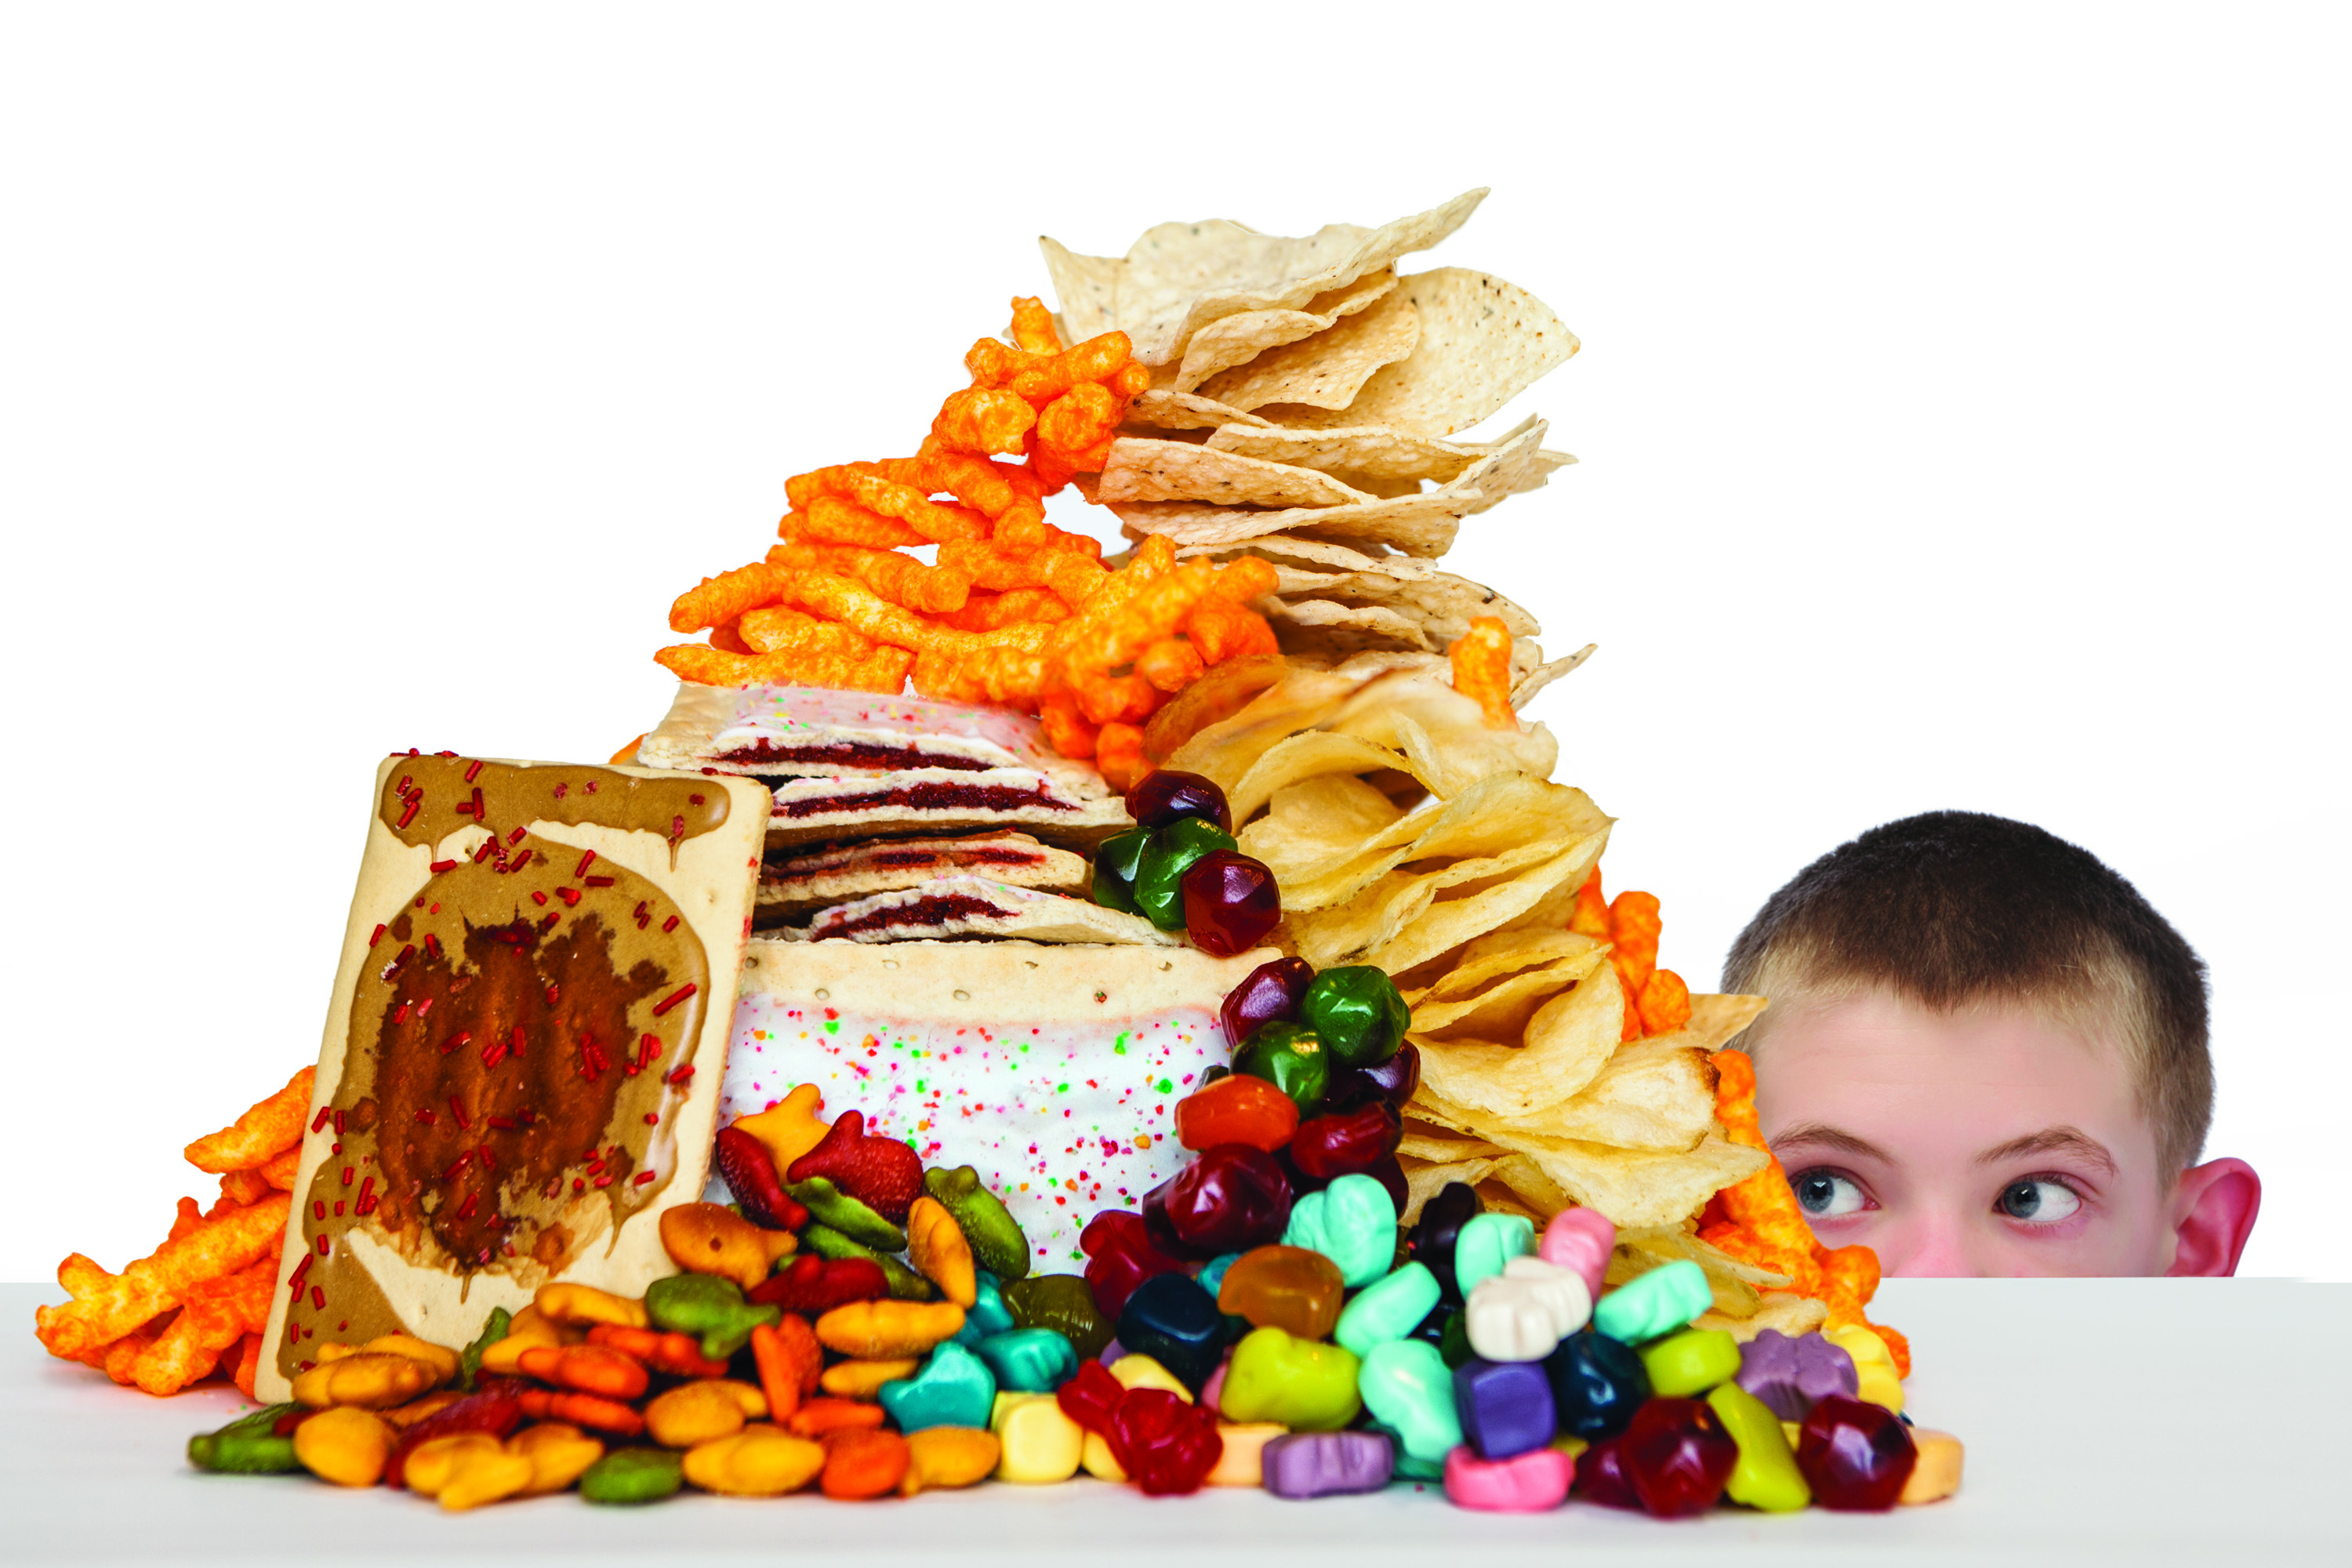 The Rudd Center reports that children are often exposed to unhealthy snack choices.